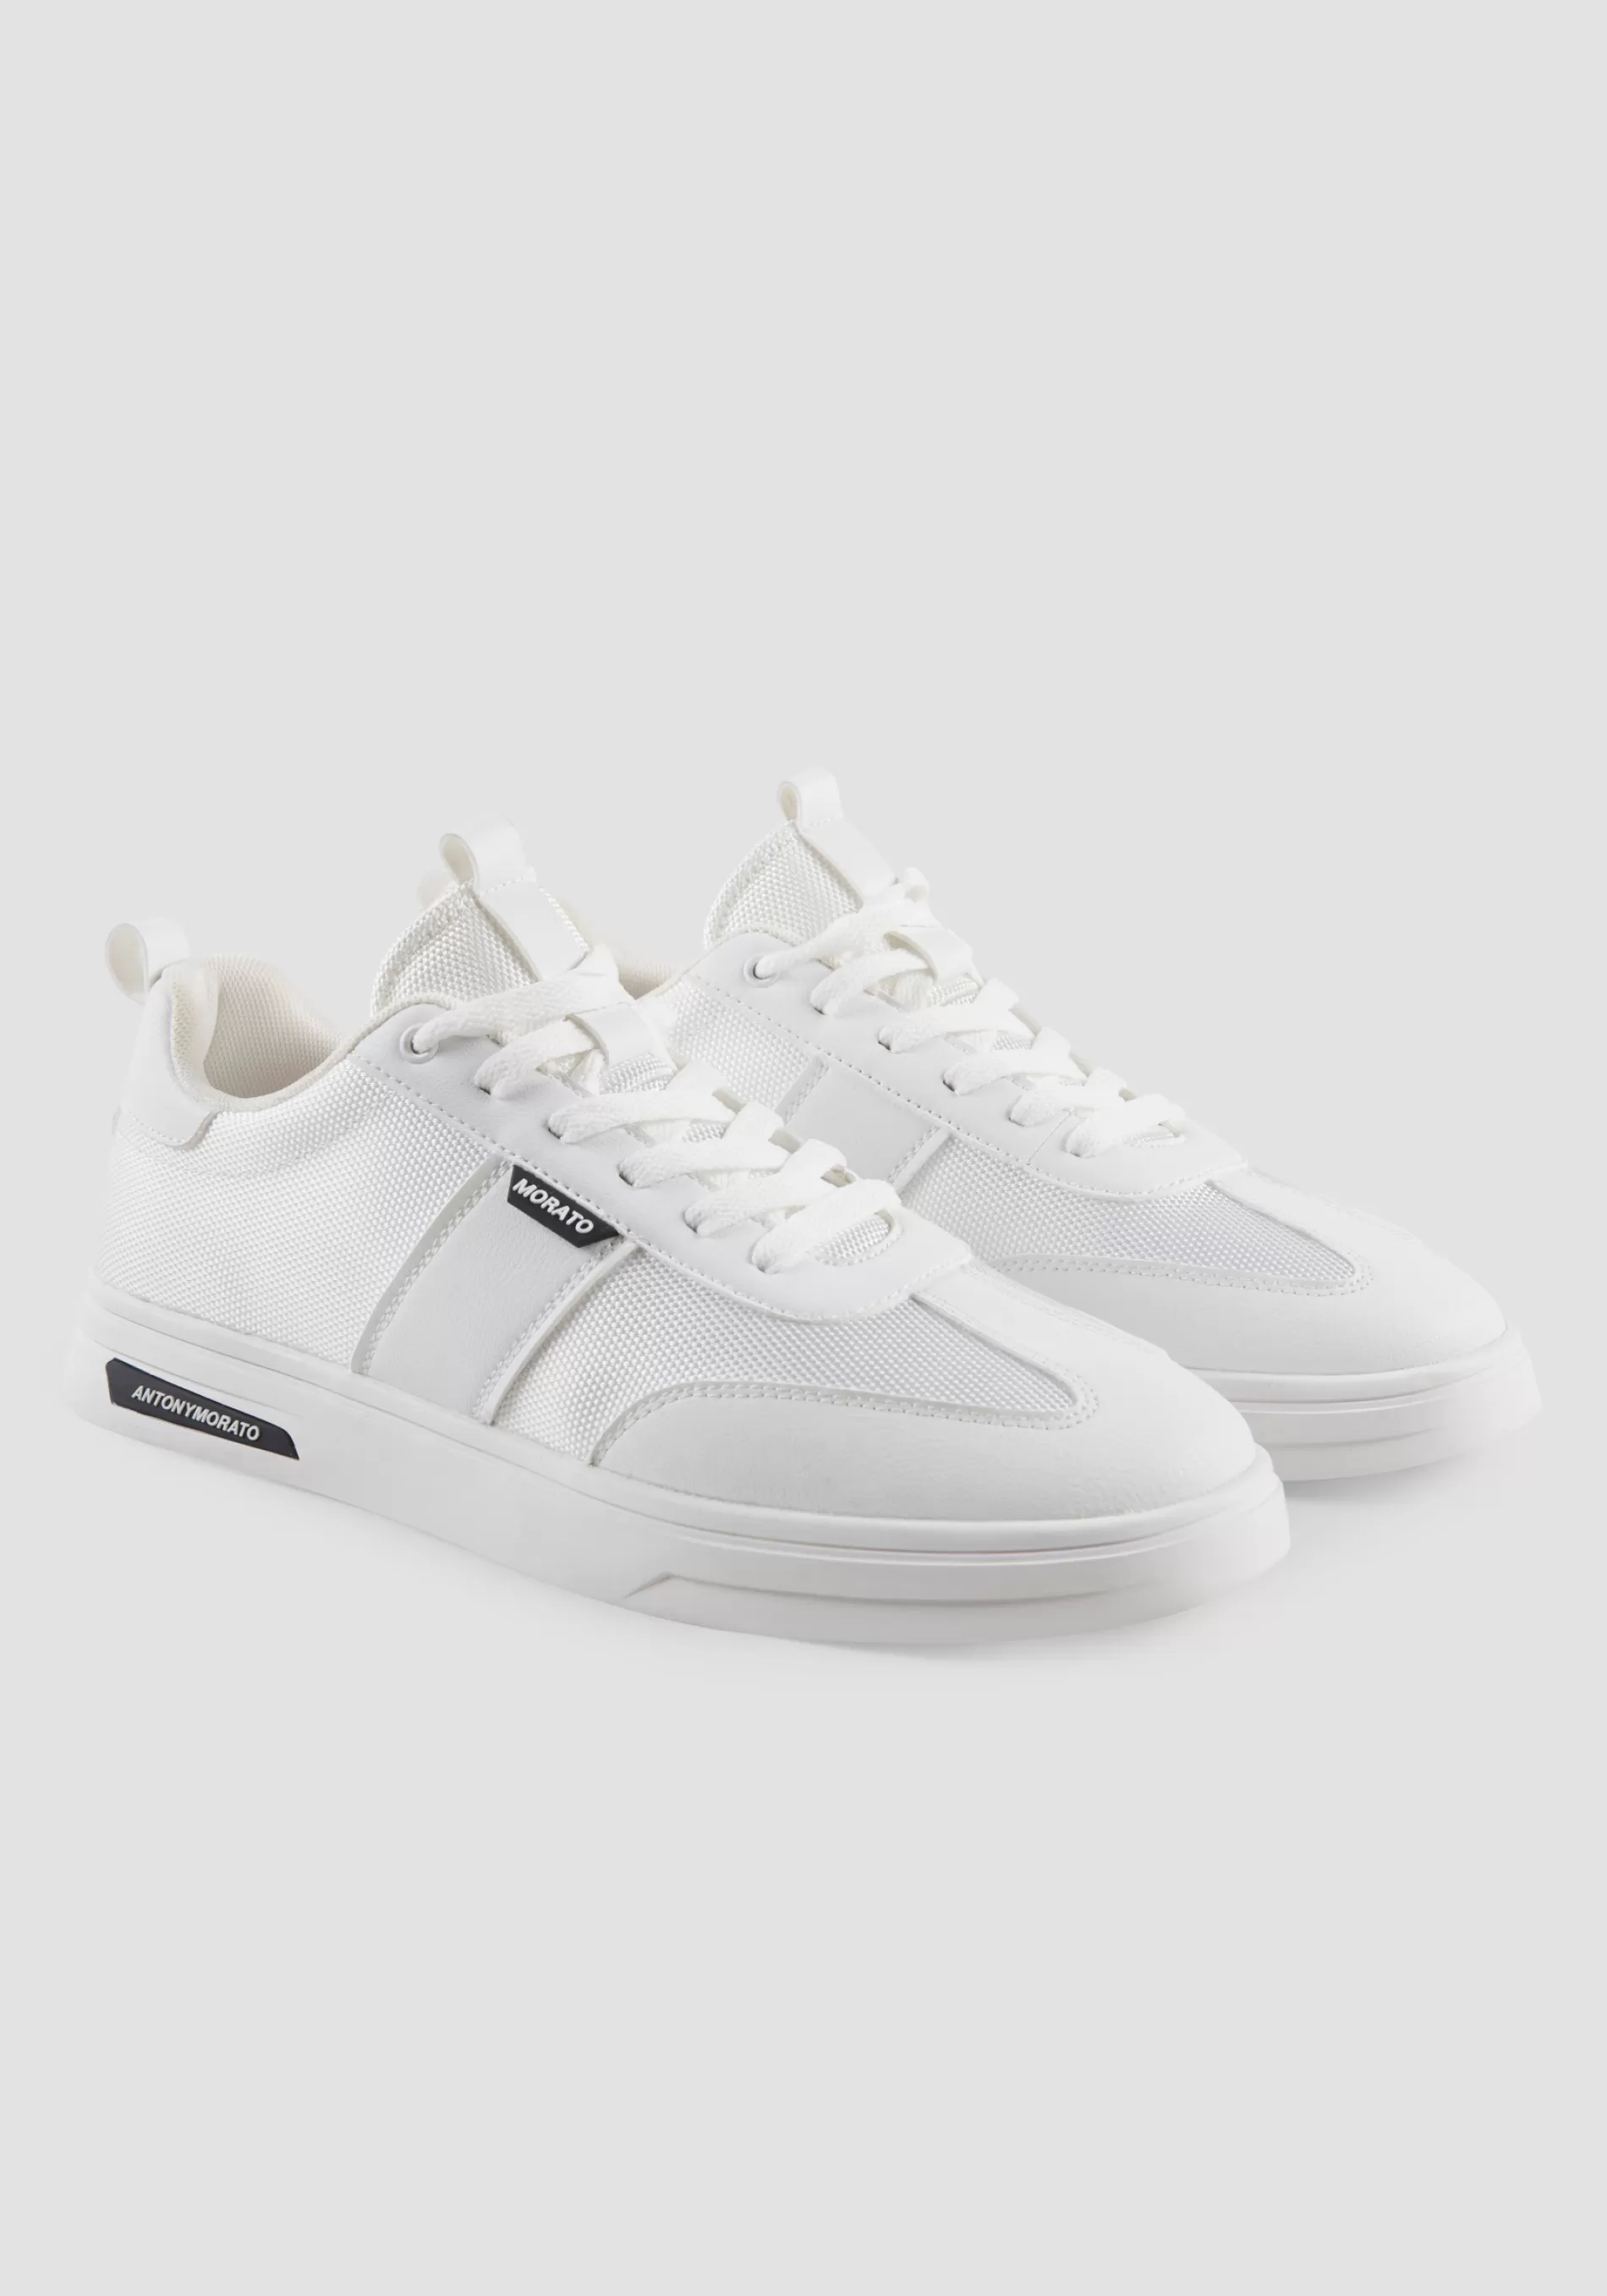 Best SNEAKER DERMOT NYLON IN FABRIC AND FAUX LEATHER Sneakers